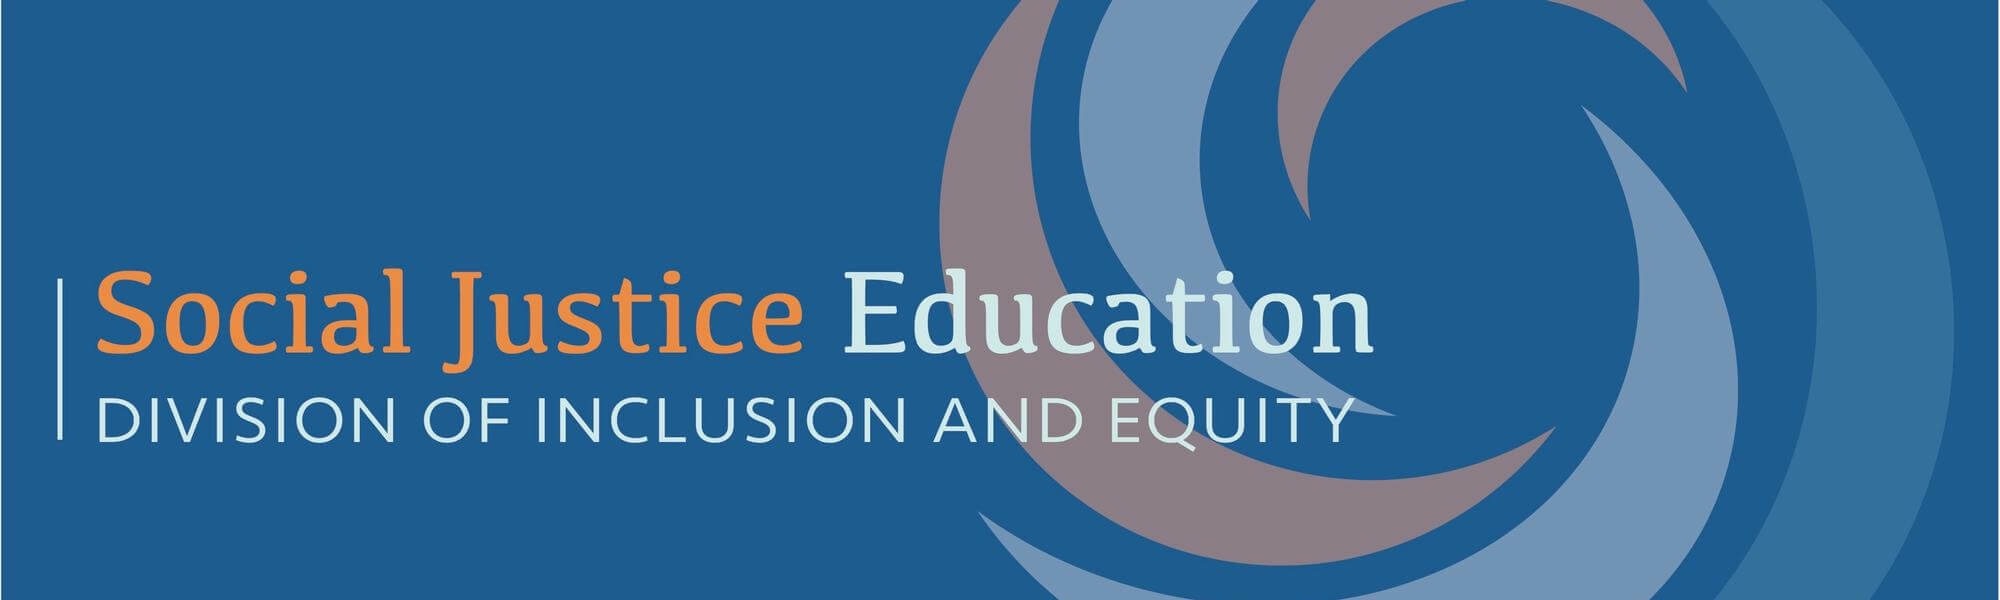 Social Justice Education Division of Inclusion and Equity